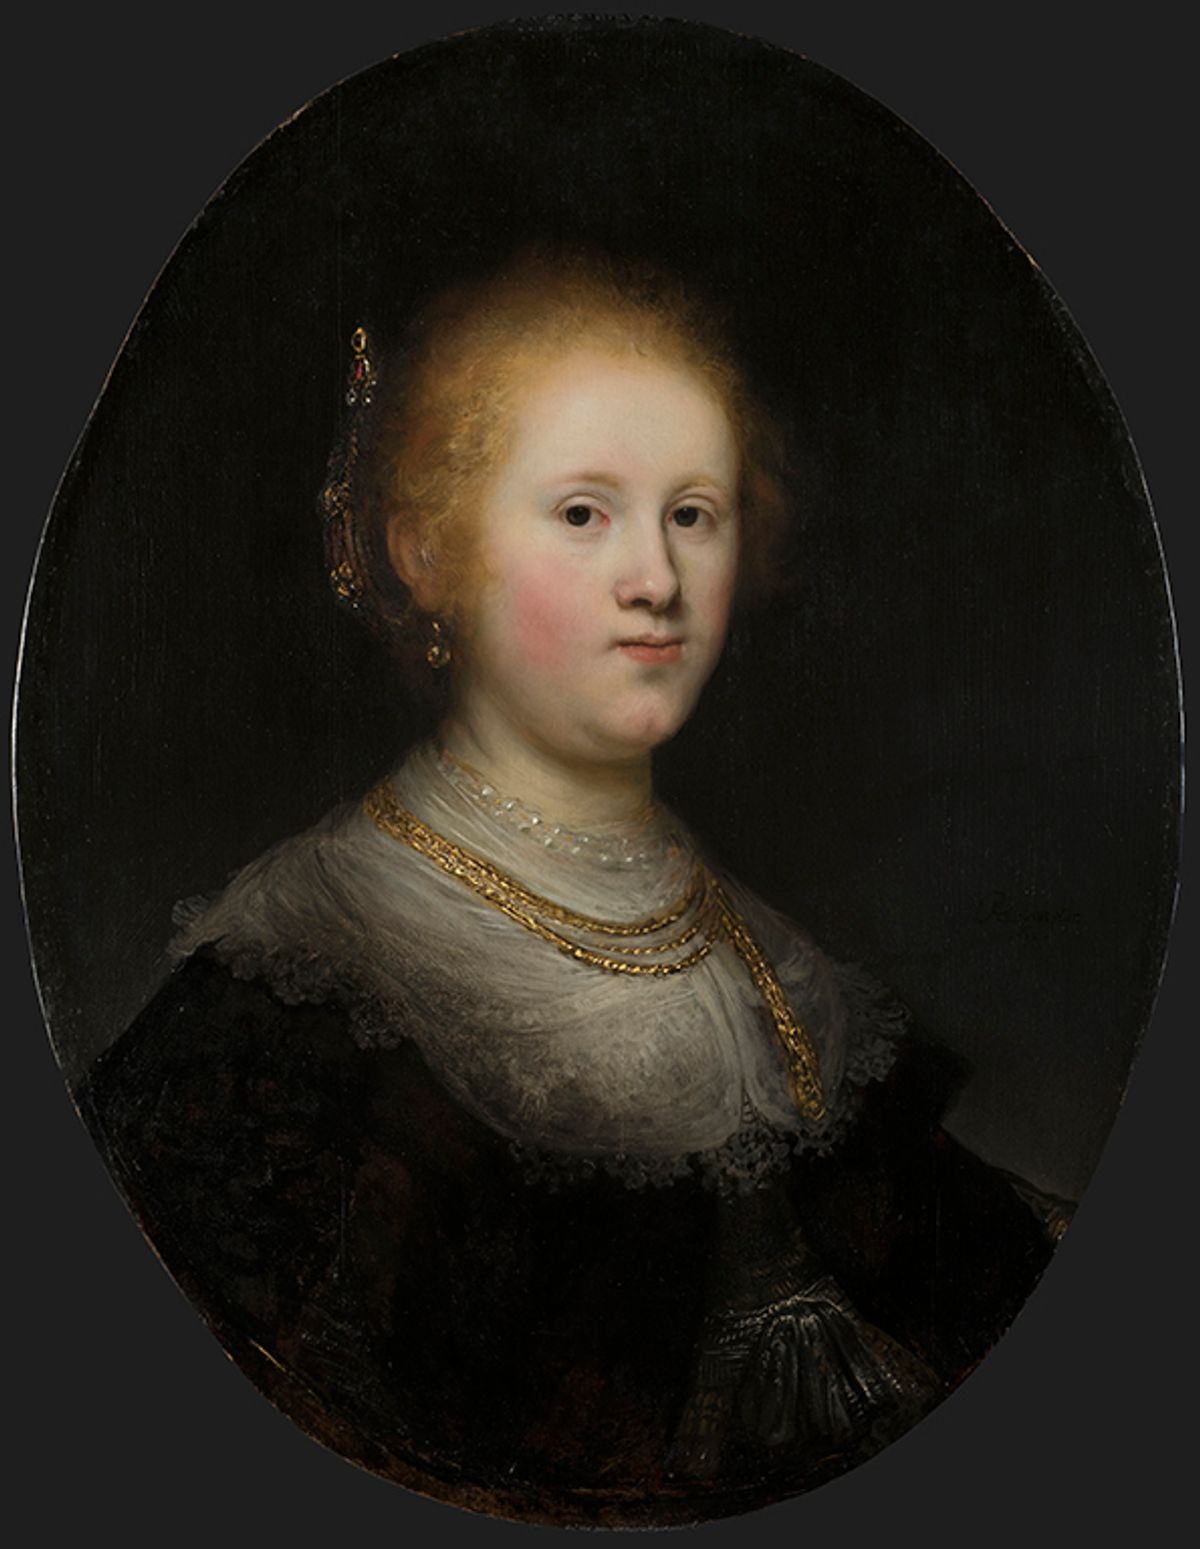 Rembrandt's Portrait of a Young Woman (1632) has gone on view at the Allentown Art Museum Courtesy of the Allentown Art Museum